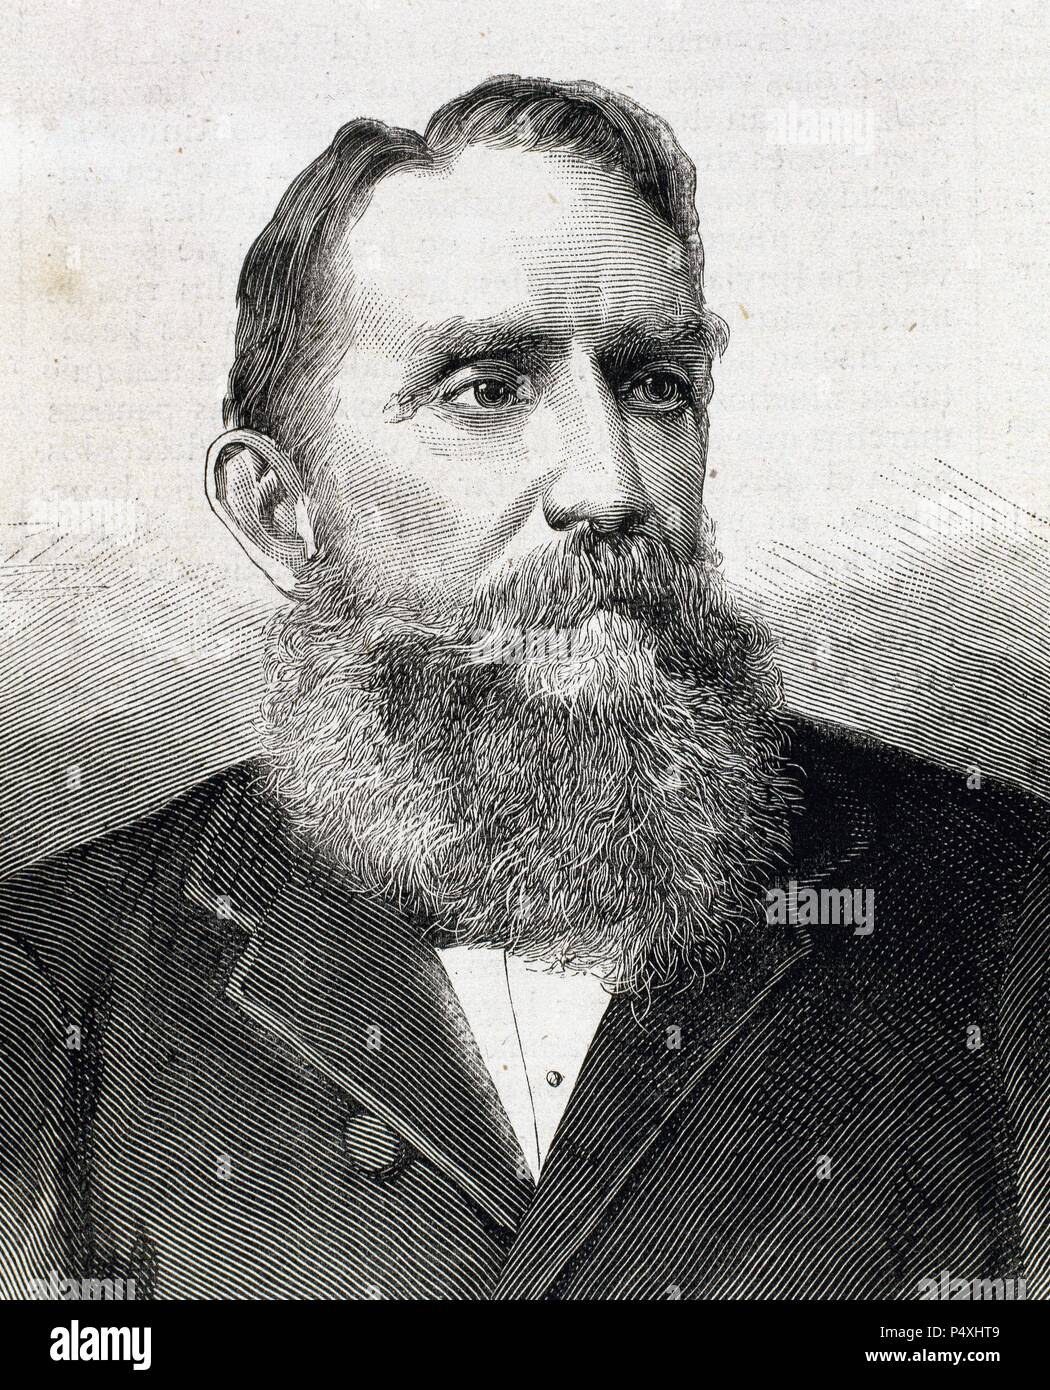 Rafael Nunez (1825-1894). Colombian author, lawyer, journalist and politician. Elected President of Colombia in 1880 and in 1884. Engraving by Carretero. Stock Photo